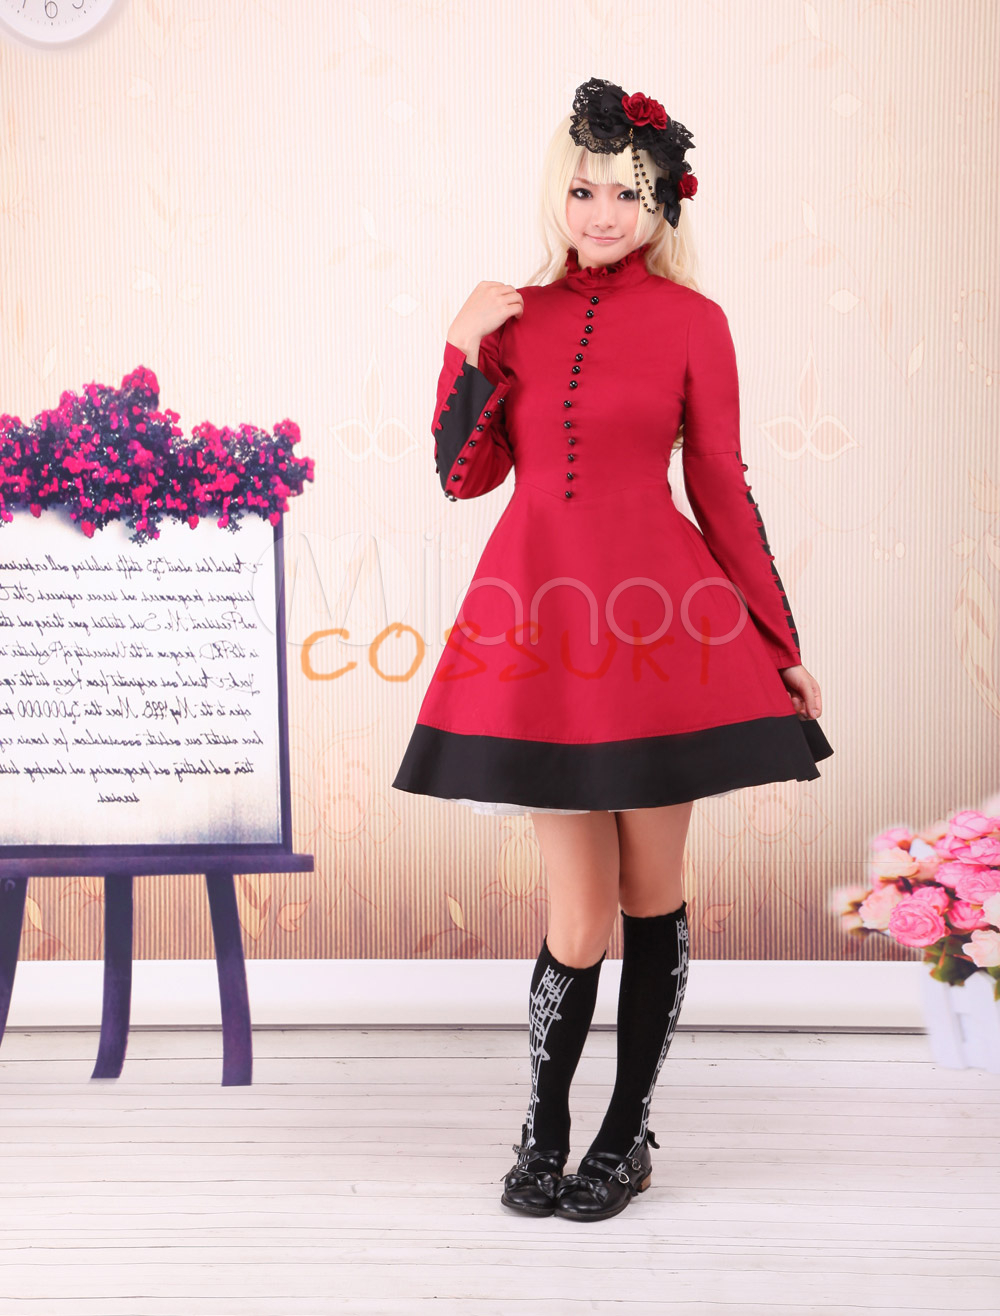 Free shipping! Newest! High - quality! Dark Red Cotton Stand Collar Bow Classic Lolita Dress